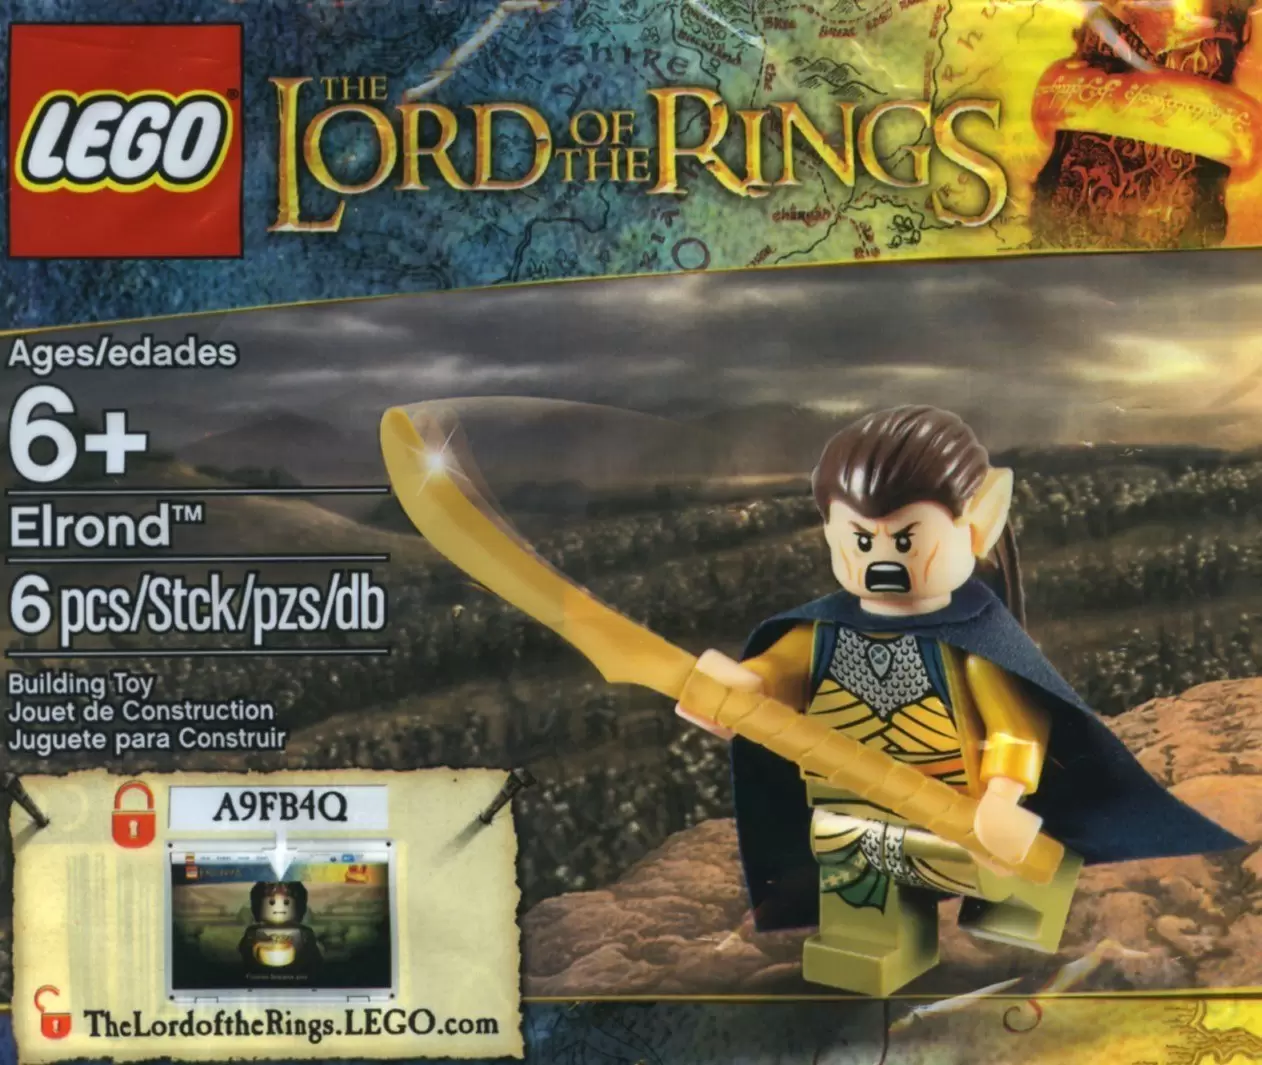 LEGO Lord of the Rings - Elrond